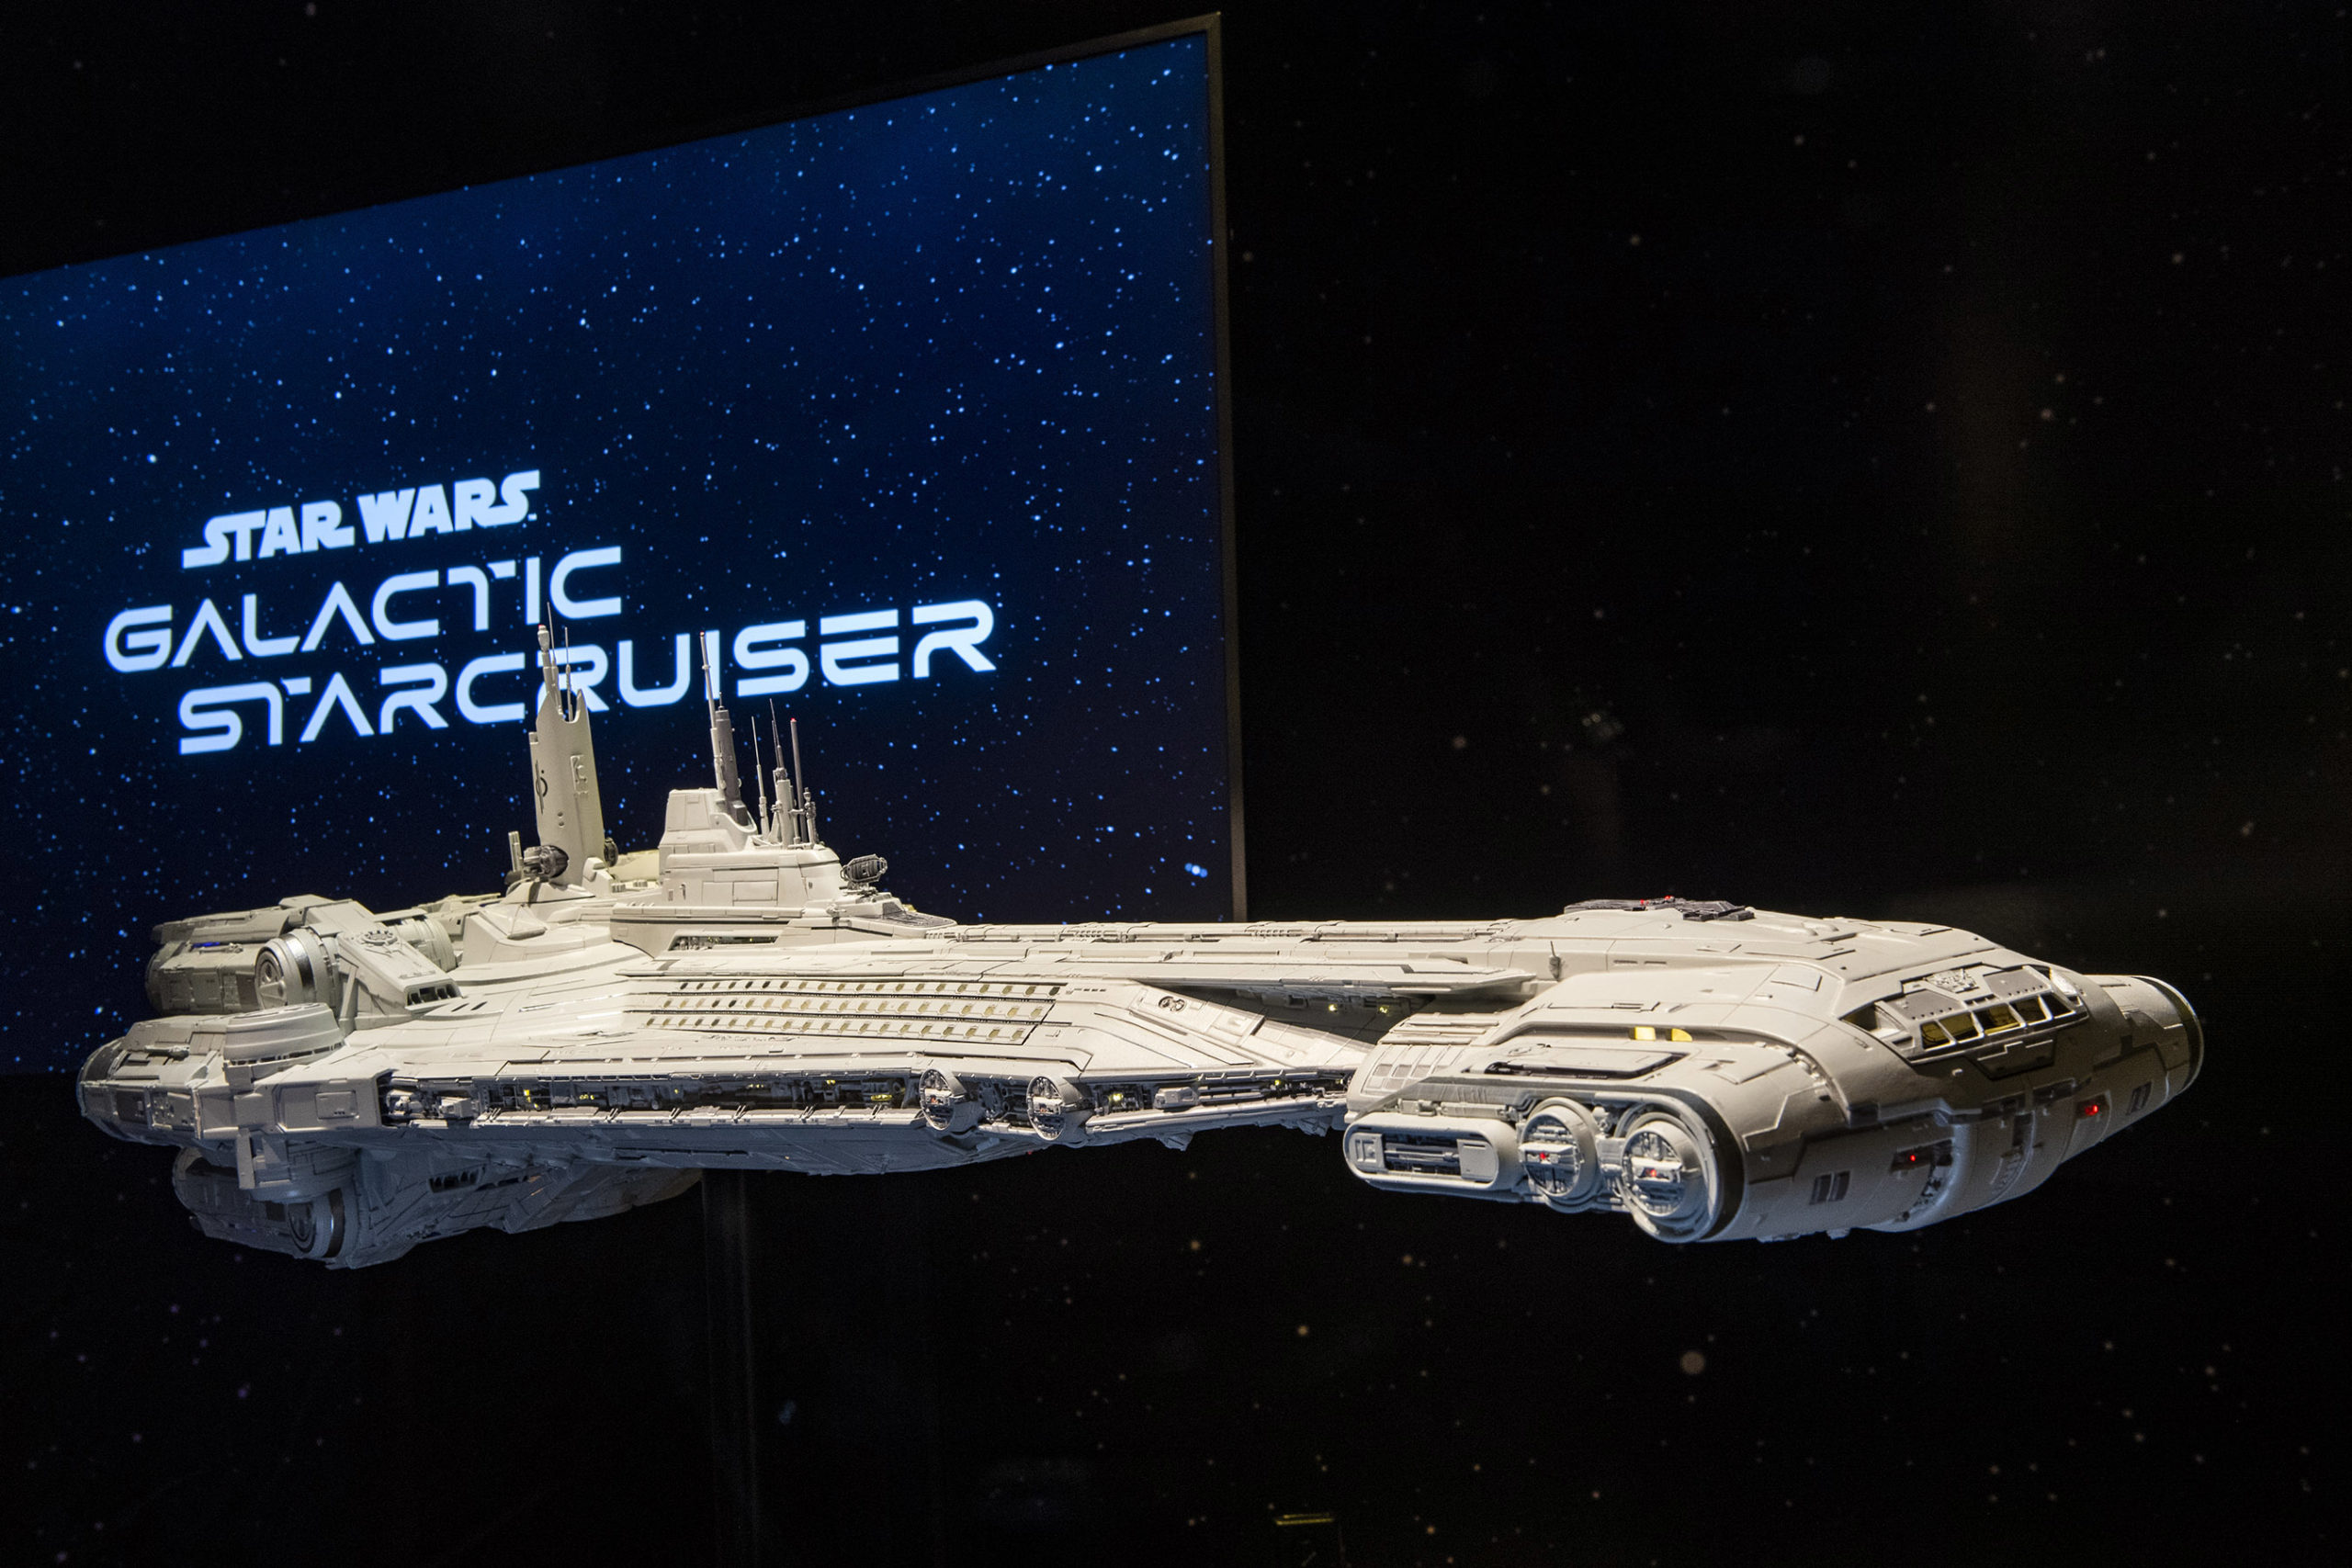 Star Wars Galactic Starcruiser Set To Launch In 2022